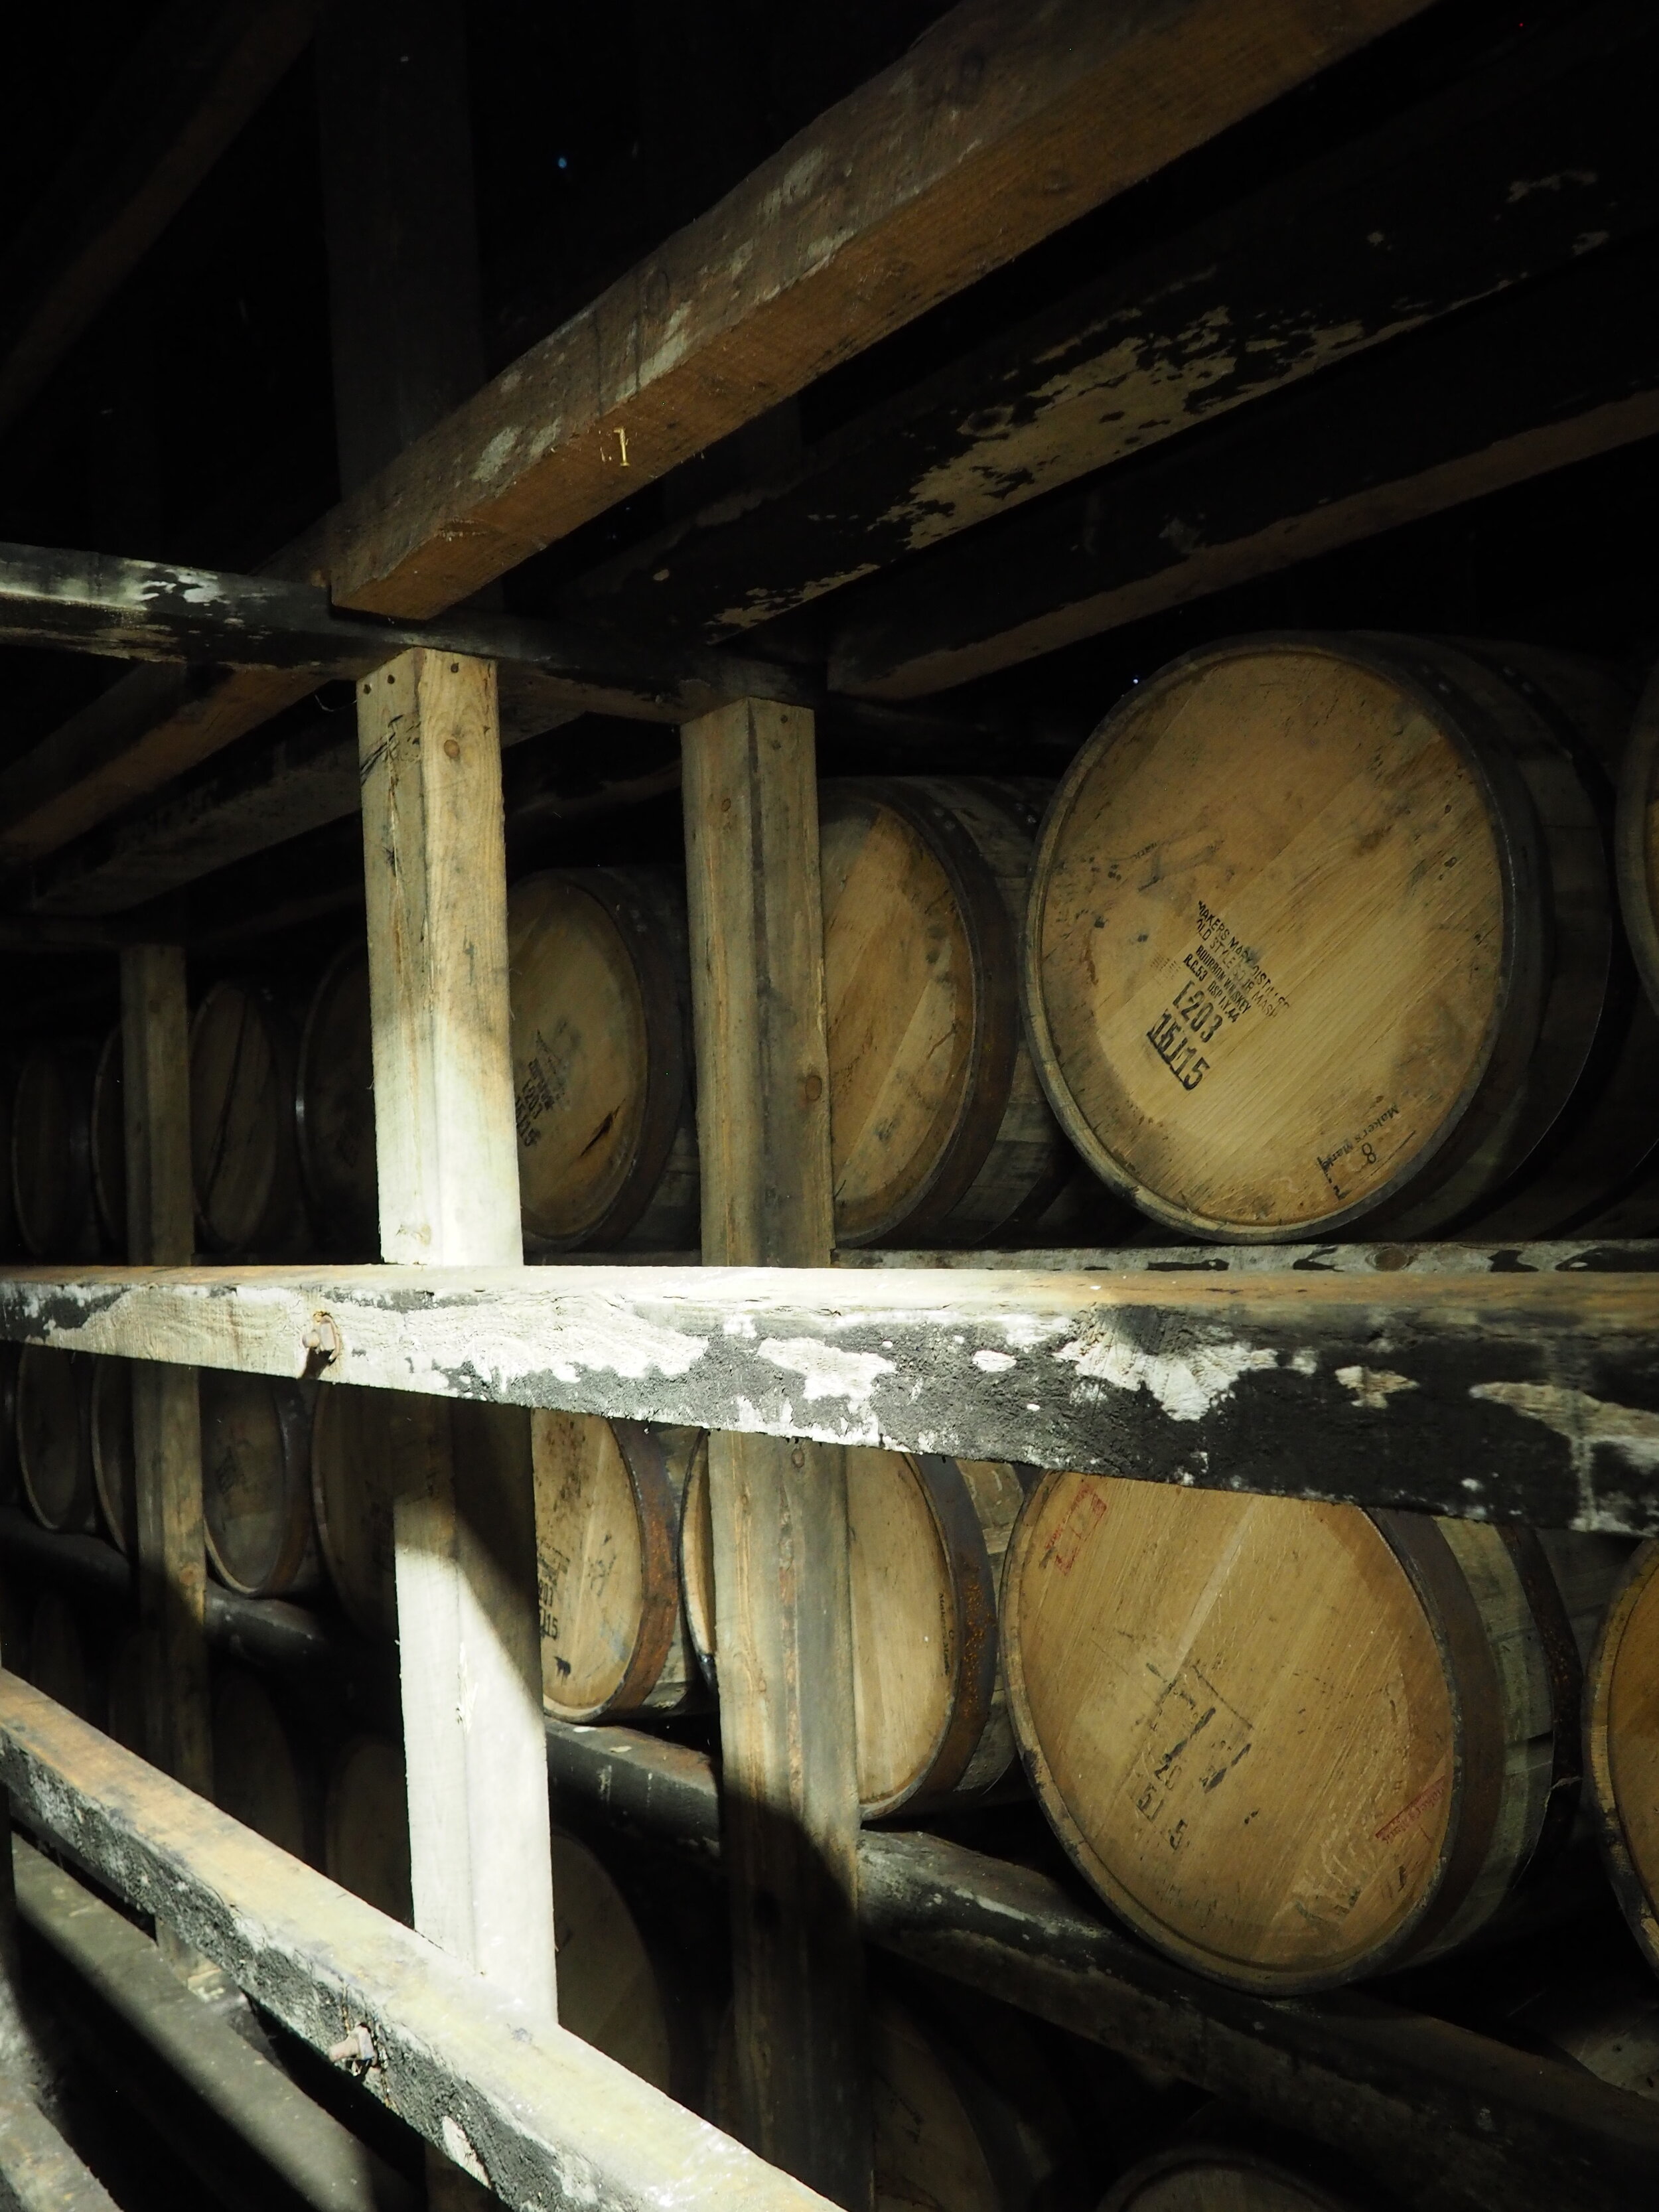 Maker’s Mark is considered ‘small batch’ bourbon and is one of the few distillers to rotate these 500-pound barrels from the upper to the lower levels of the aging warehouses during the aging process.